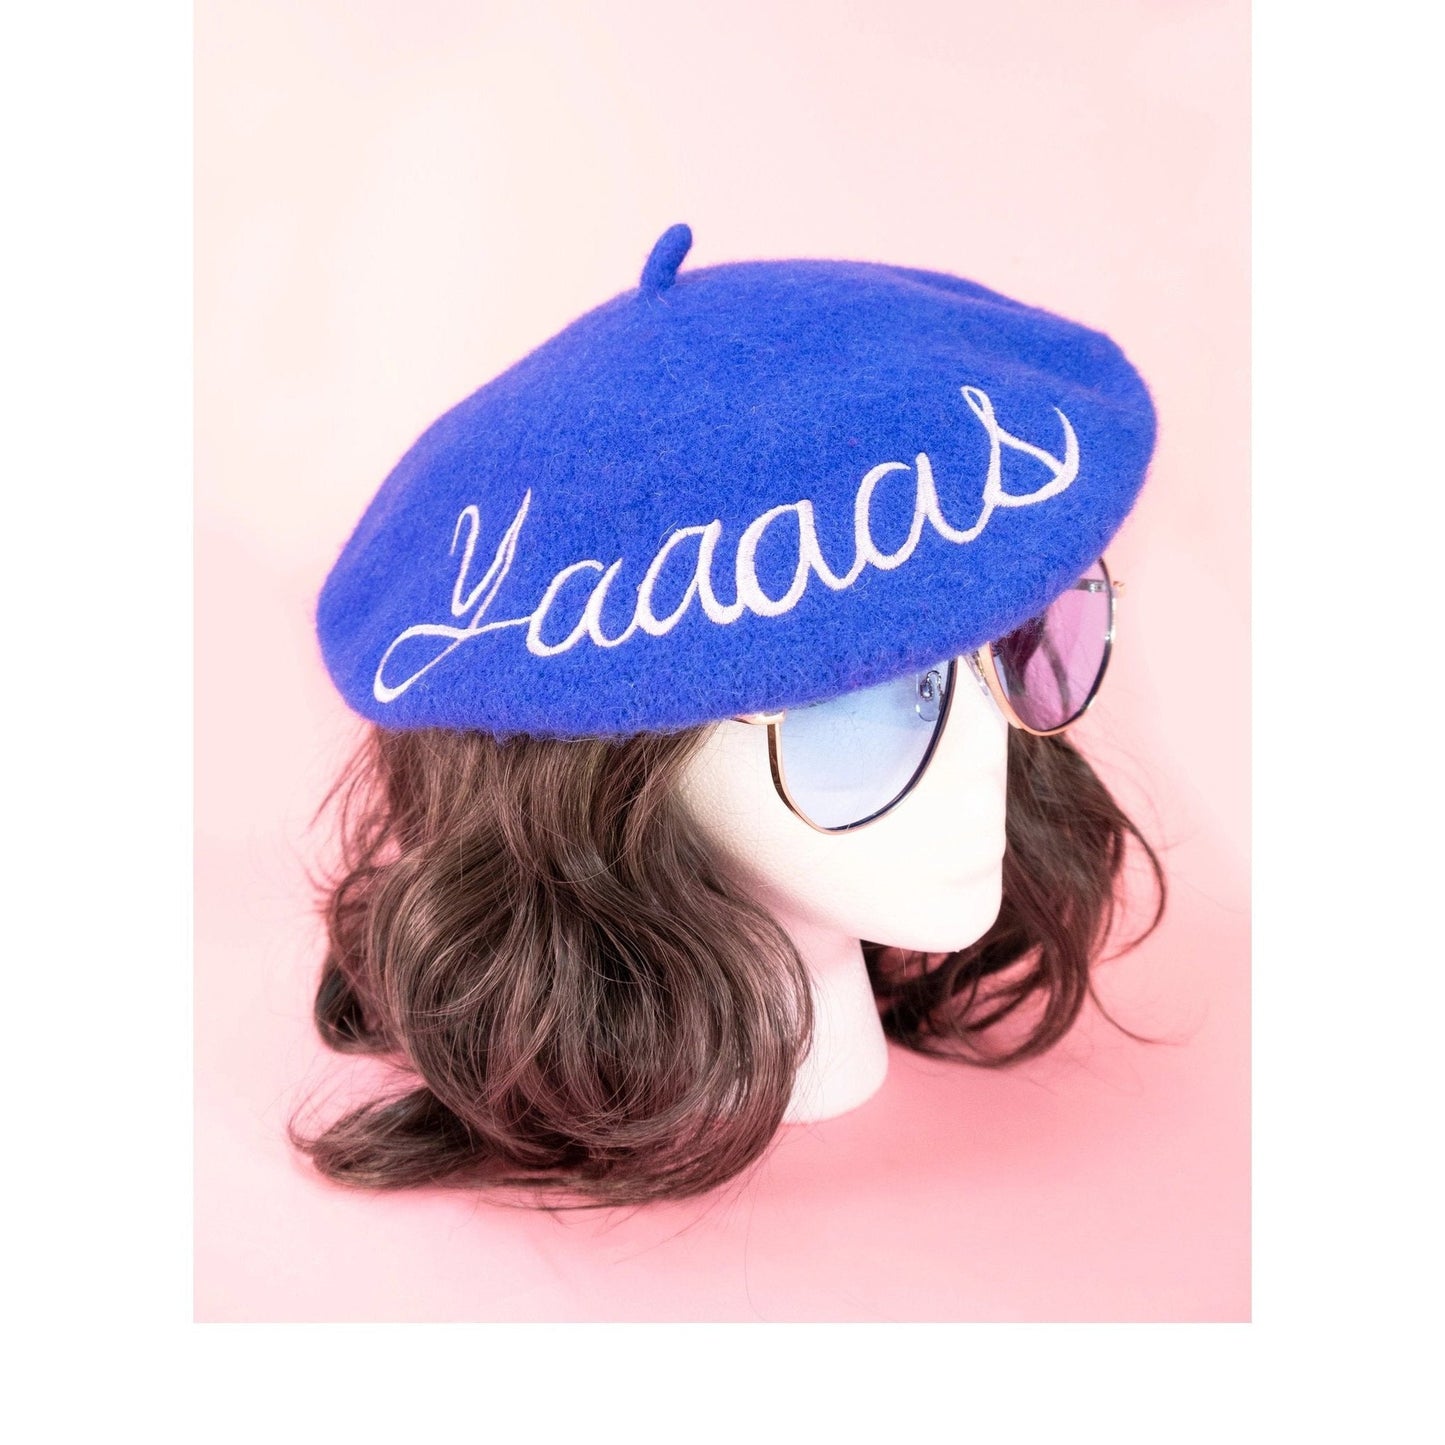 Embroidered Berets in 5 Fun Colors and Sayings | Wool and Nylon